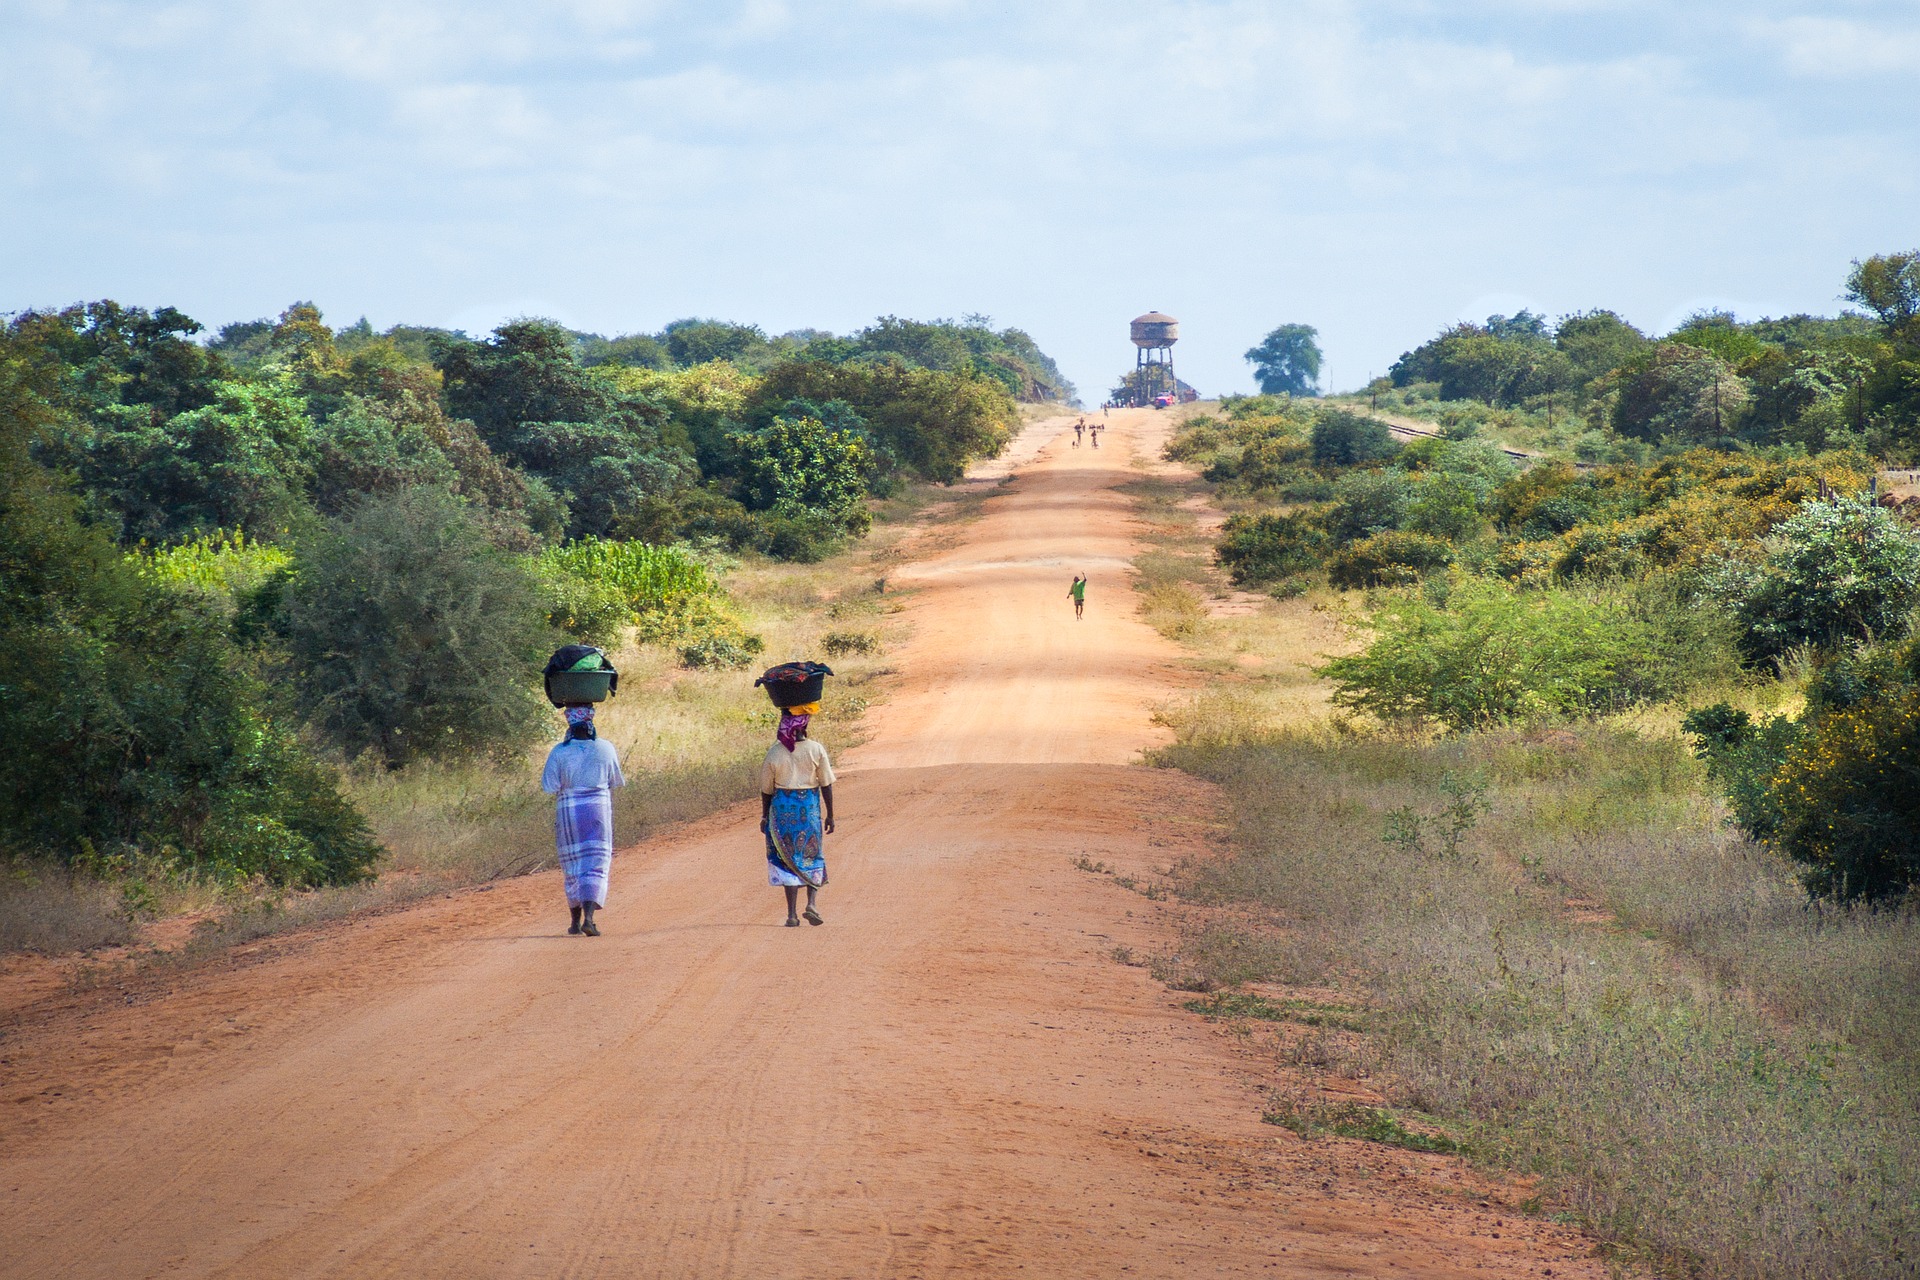 Women carry baskets on their heads as they walk down dirt road in Mozambique Africa